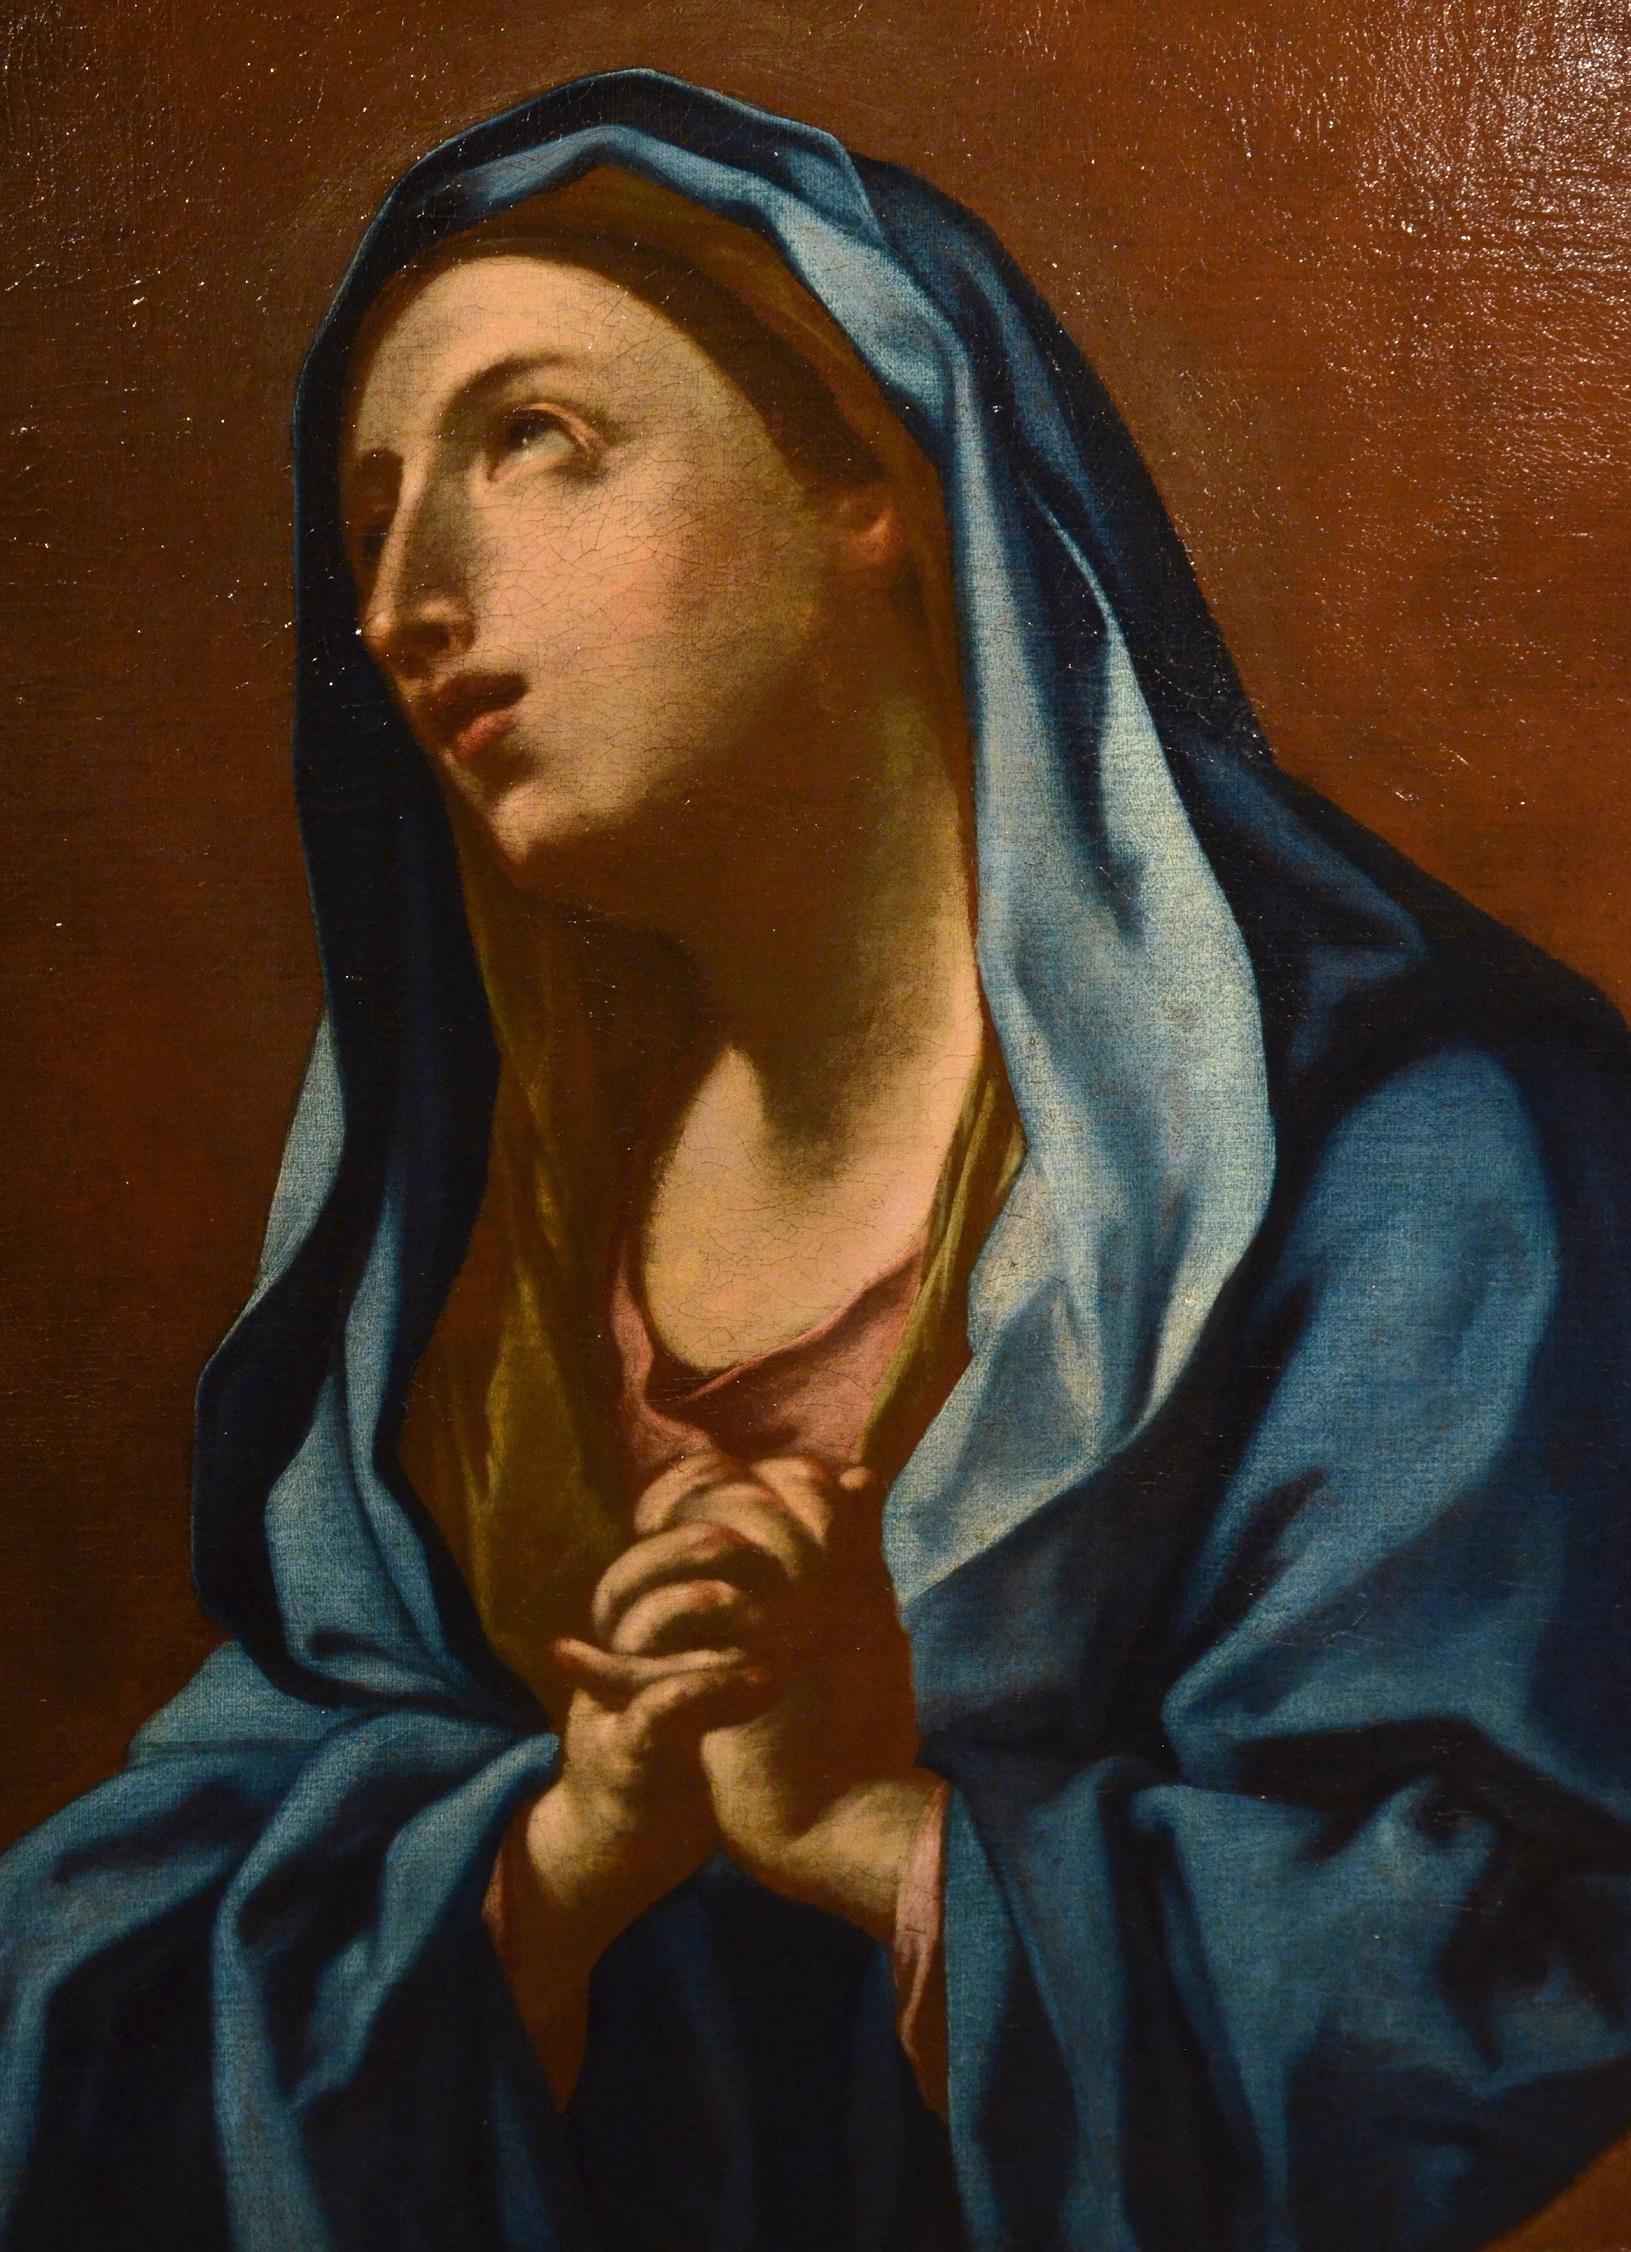 Virgin Madonna Oil on canvas Paint Old master Roman School 17/18th Century Italy - Old Masters Painting by Unknown